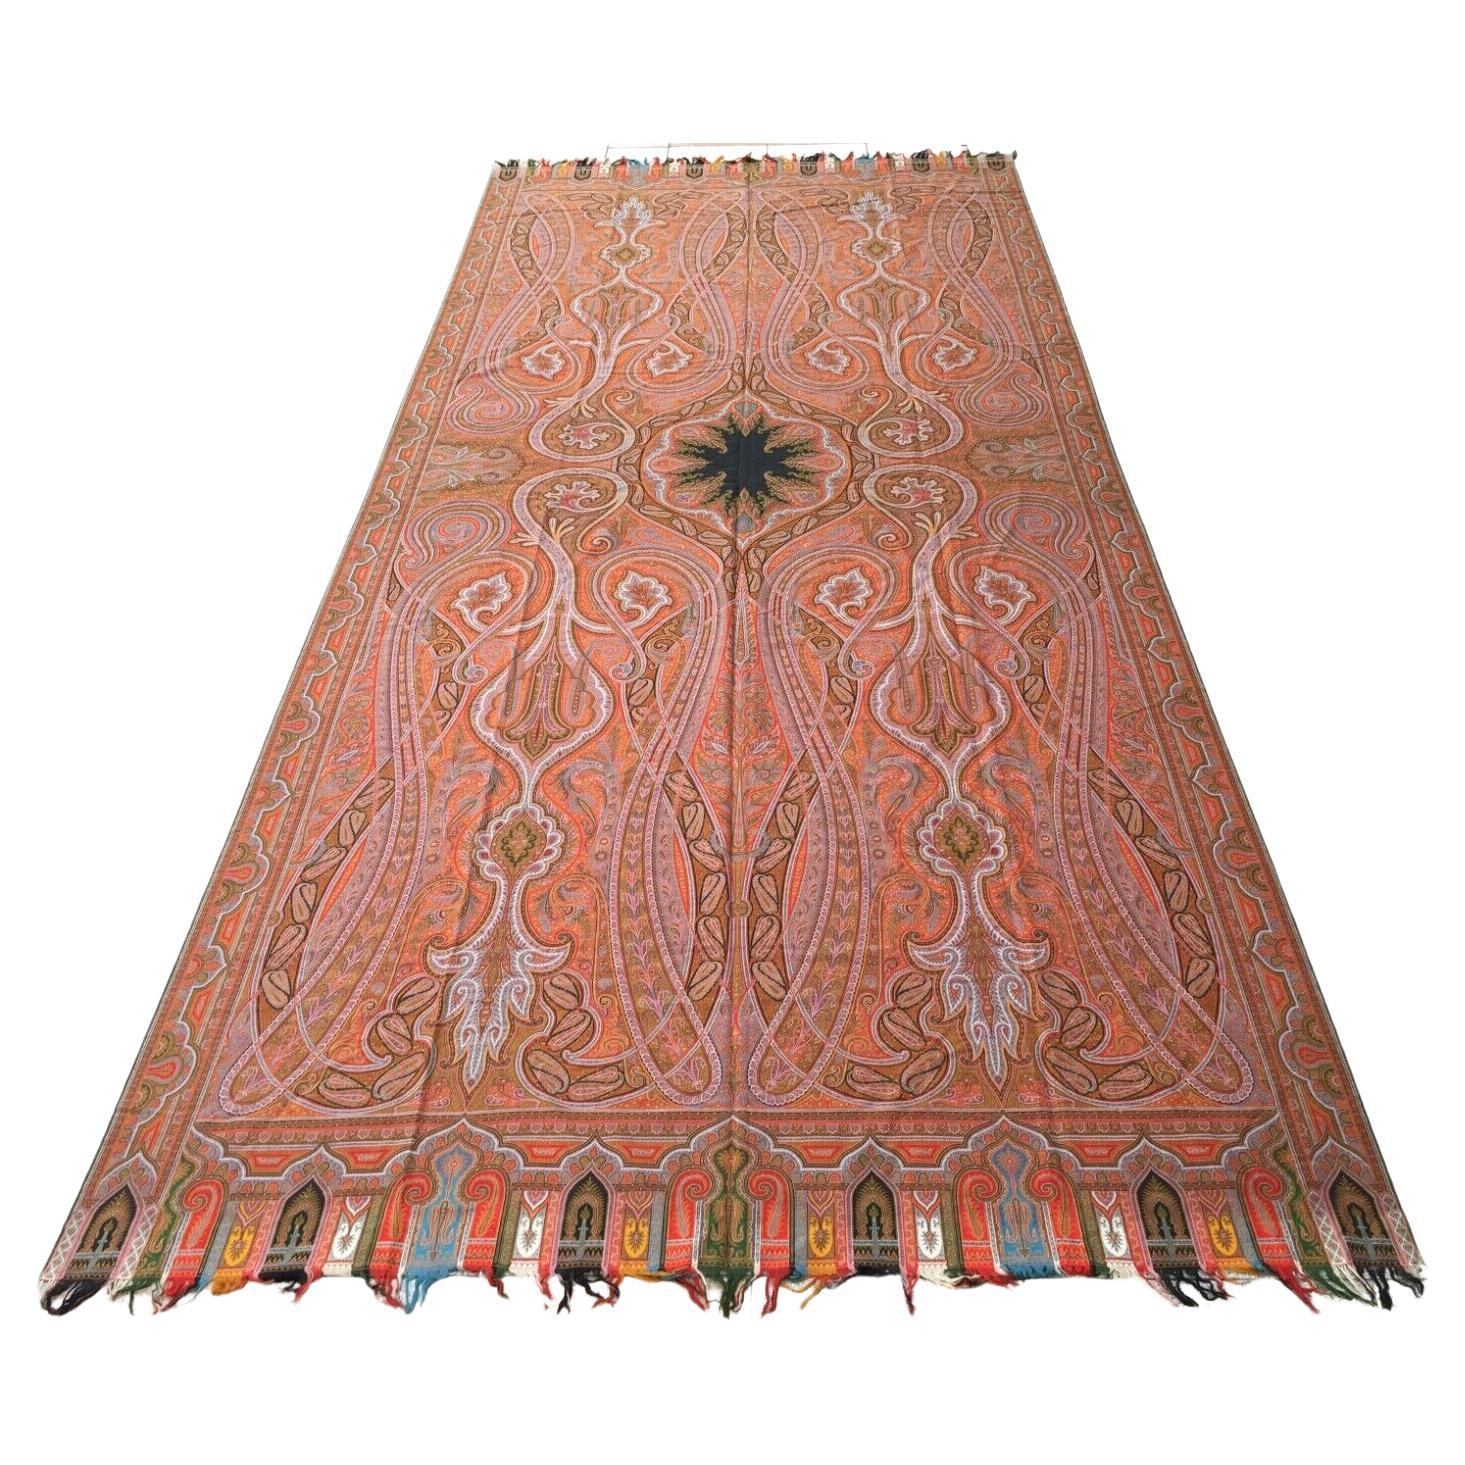 Handmade Antique Indian Cashmere Shawl featuring warm orange and red tones with intricate woven patterns